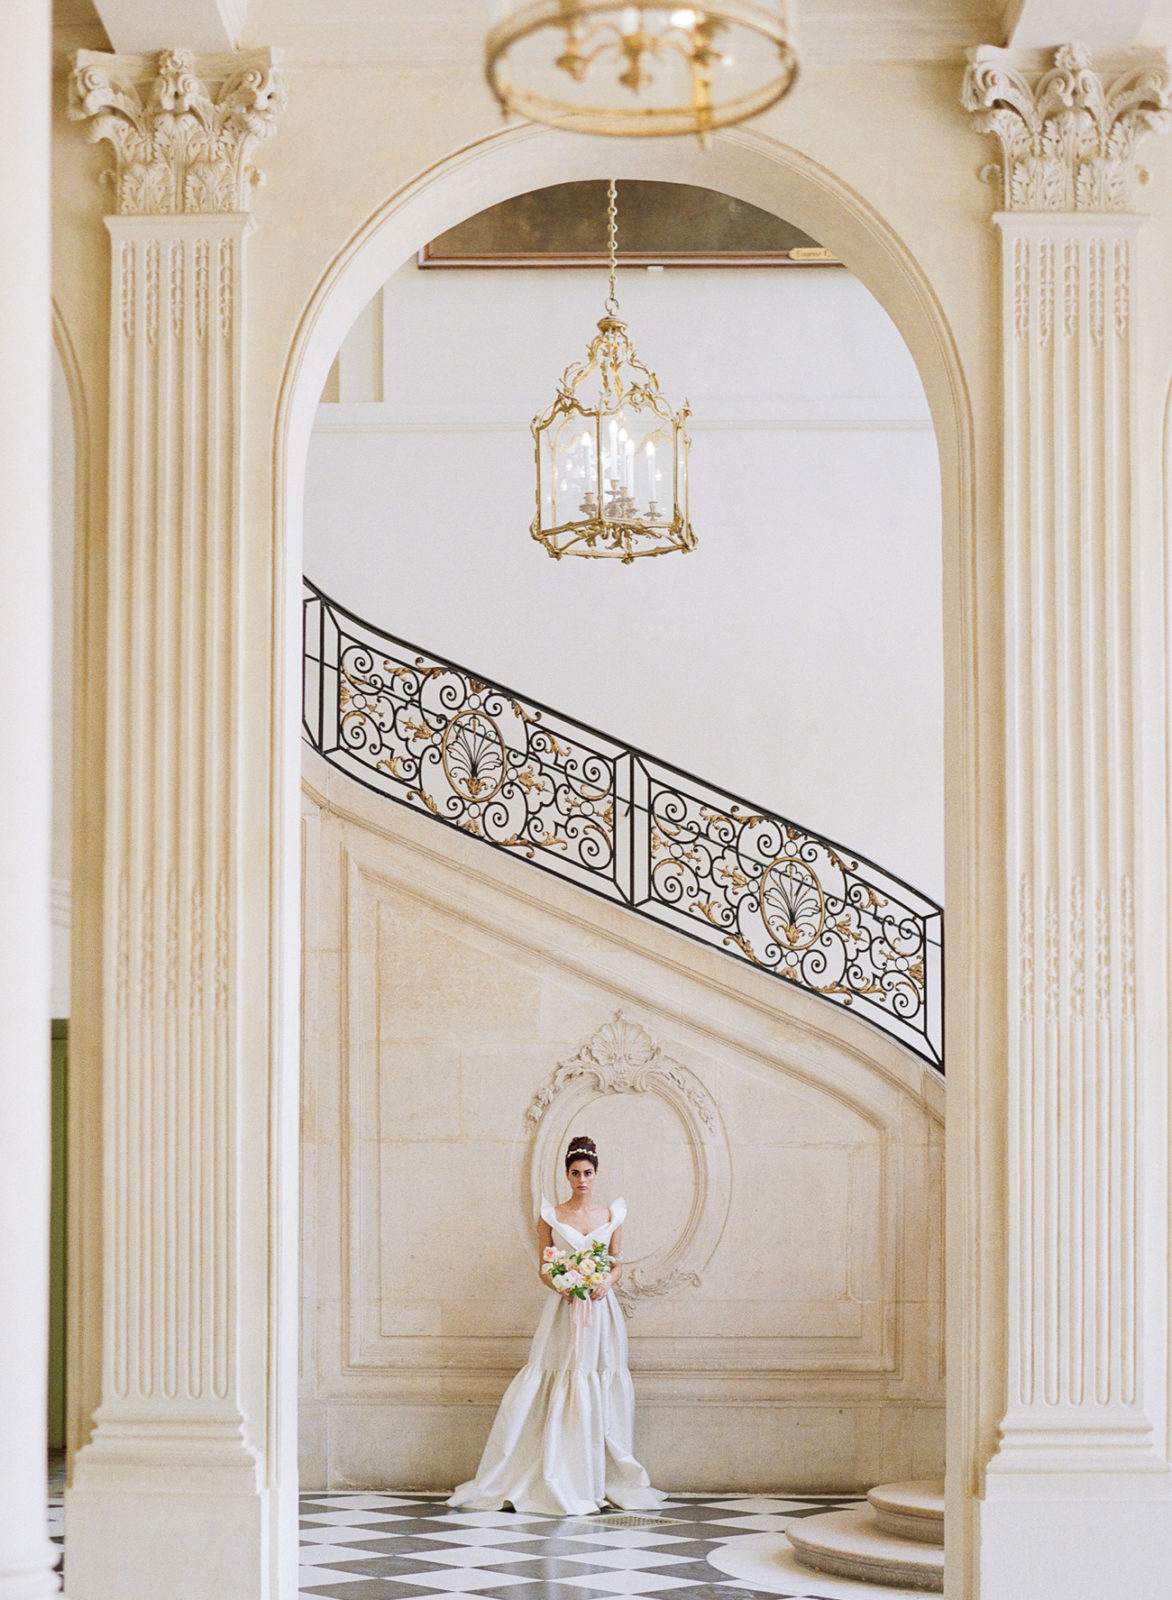 Musee Rodin Wedding Photographer | Paris Garden Wedding Photography | Paris Film Photographer | France Wedding Photography | Molly Carr Photography | Bride in Front of Staircase